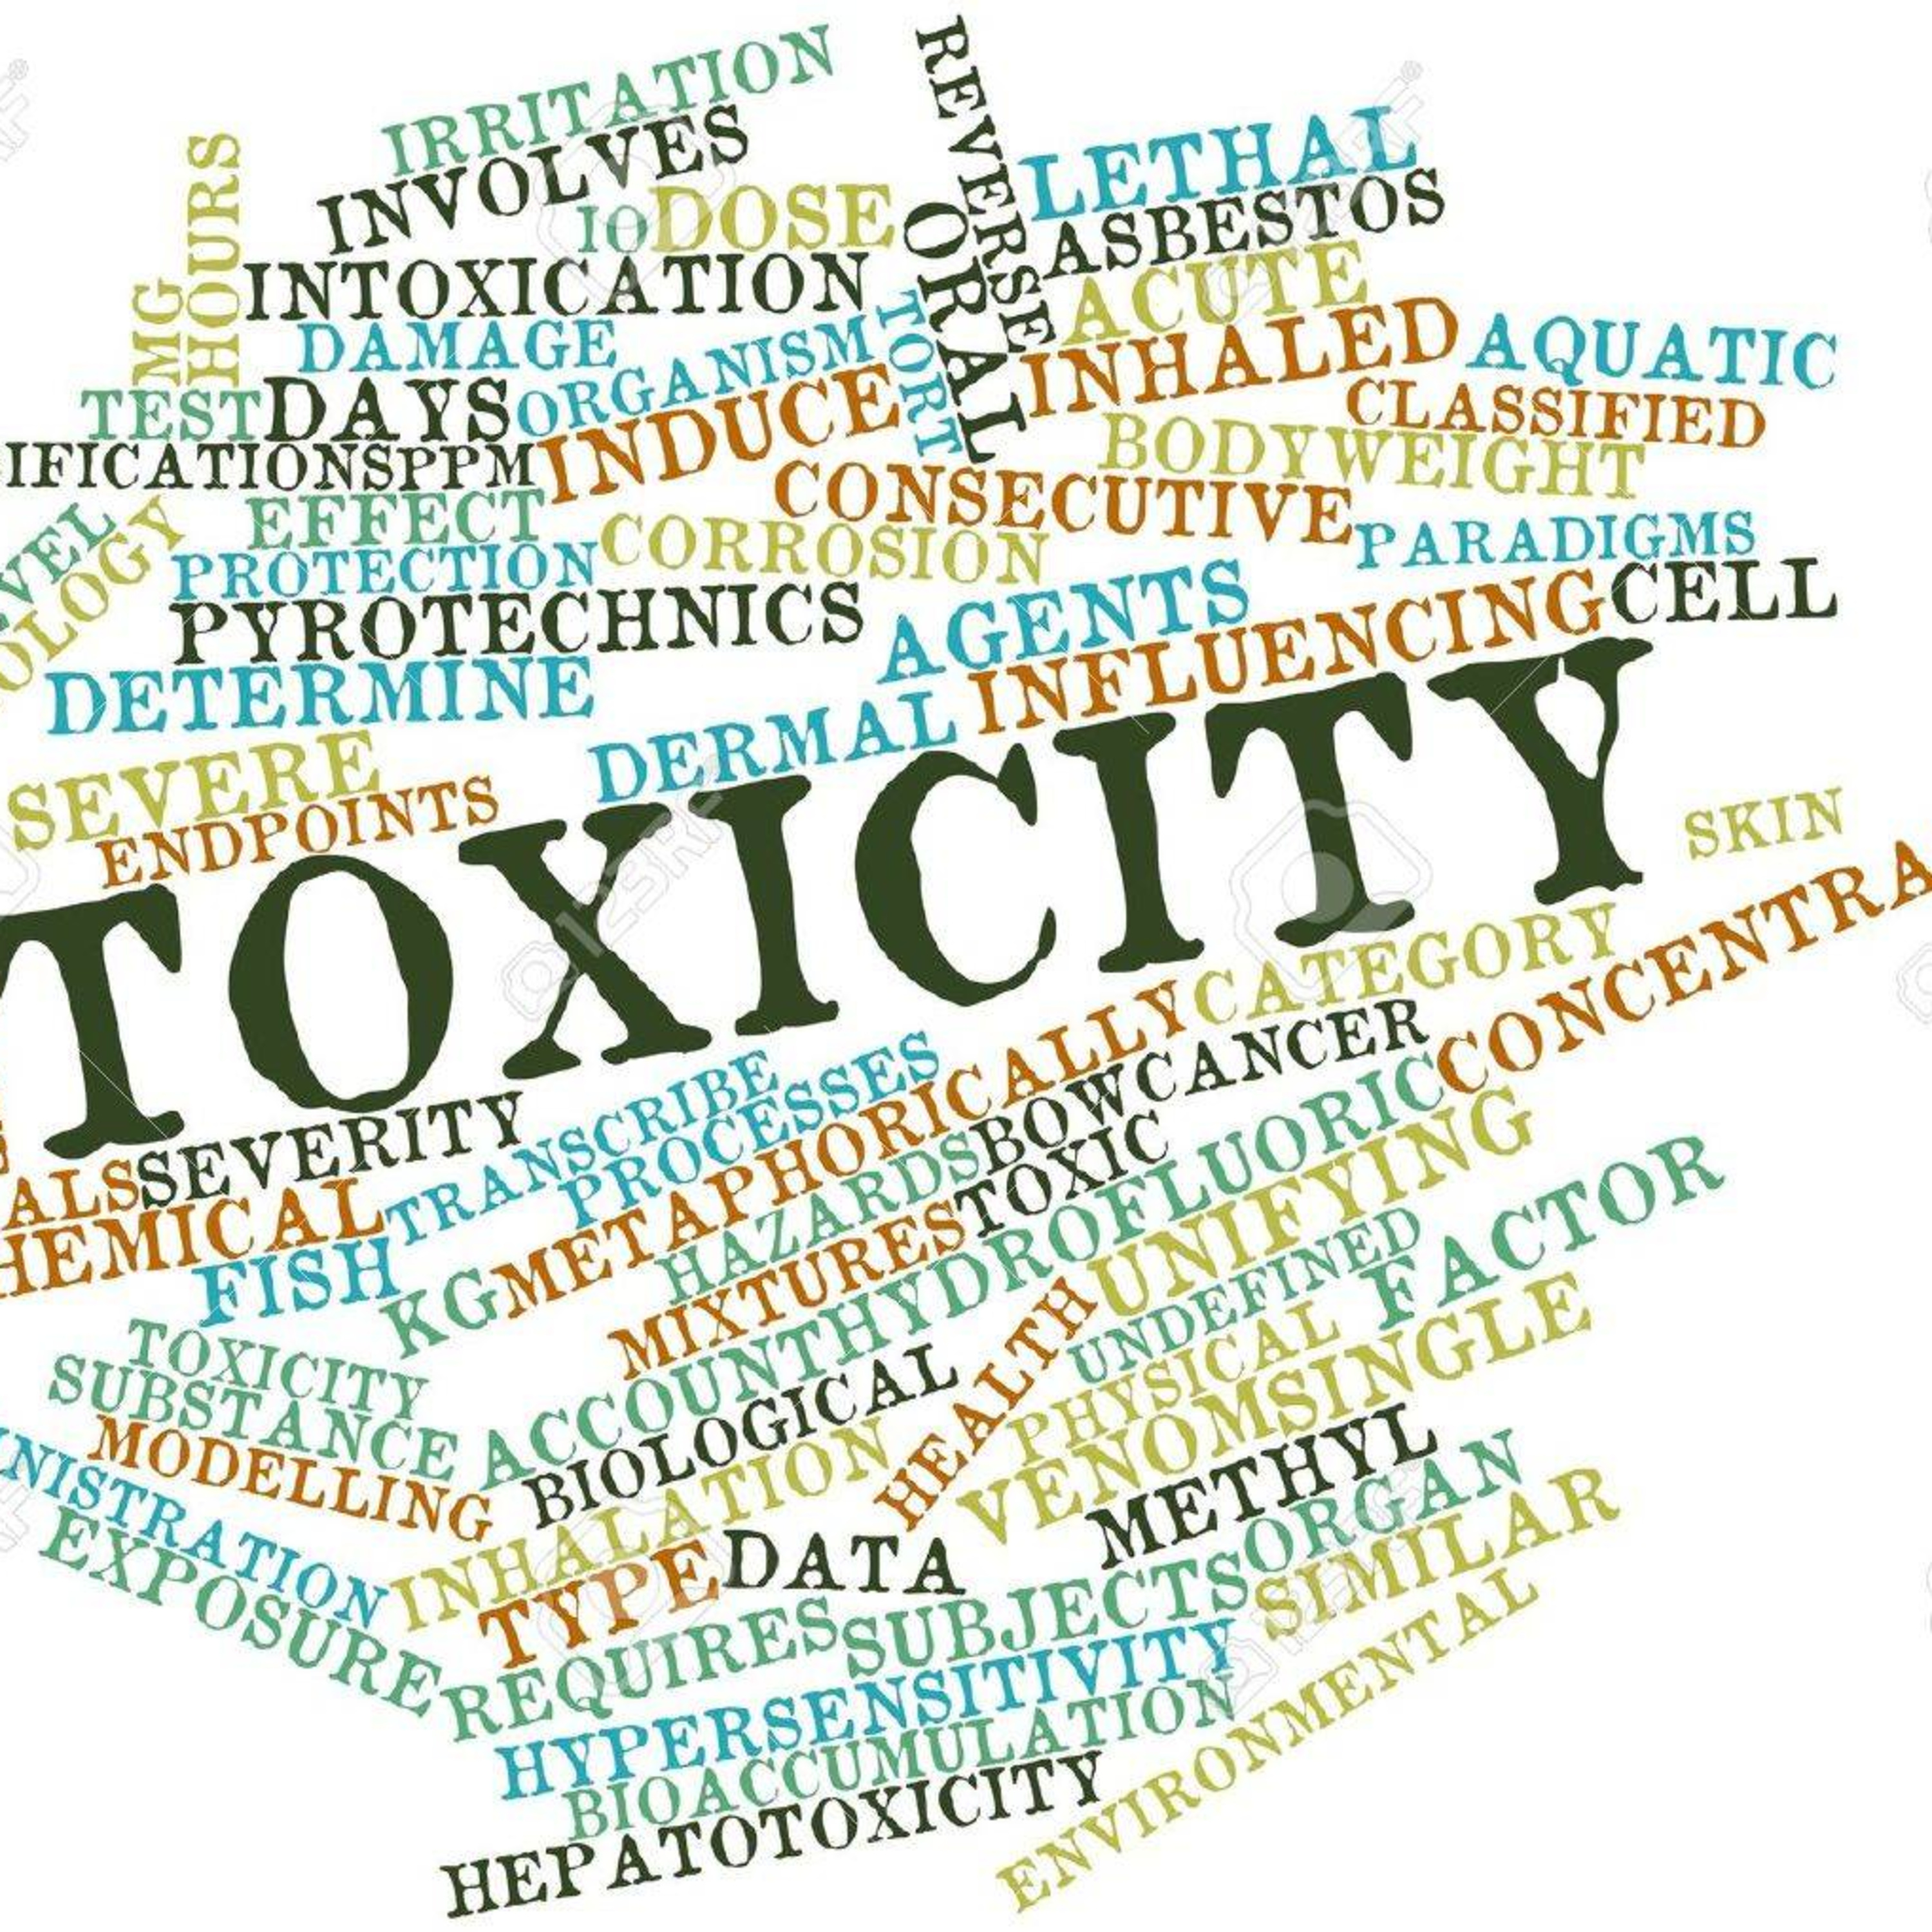 Toxicity - What it is; What it does to the body; What to do about it